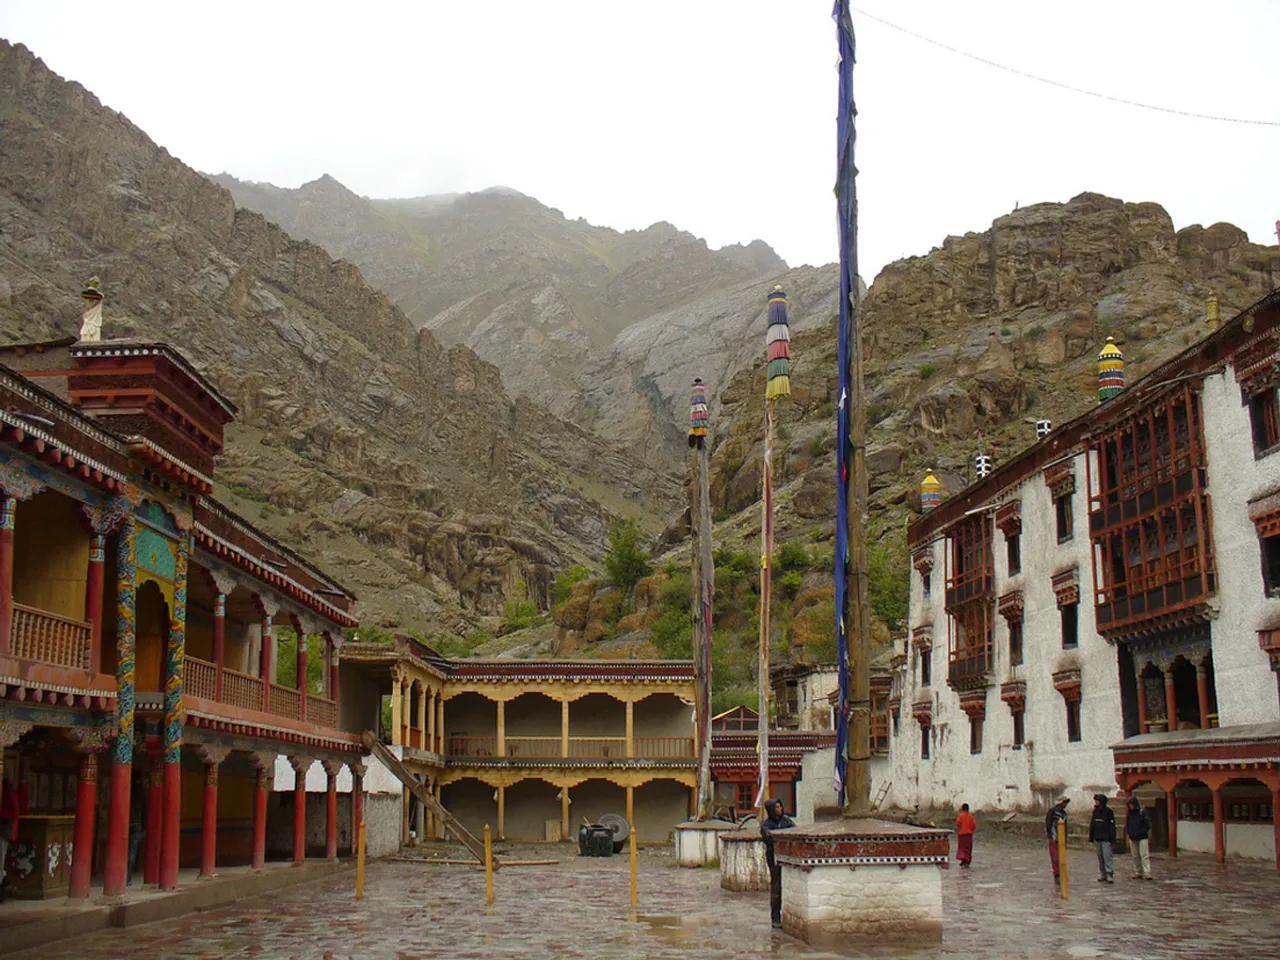 Hemis Monastery in Ladakh was built in 11th century and later rebuilt in 1672